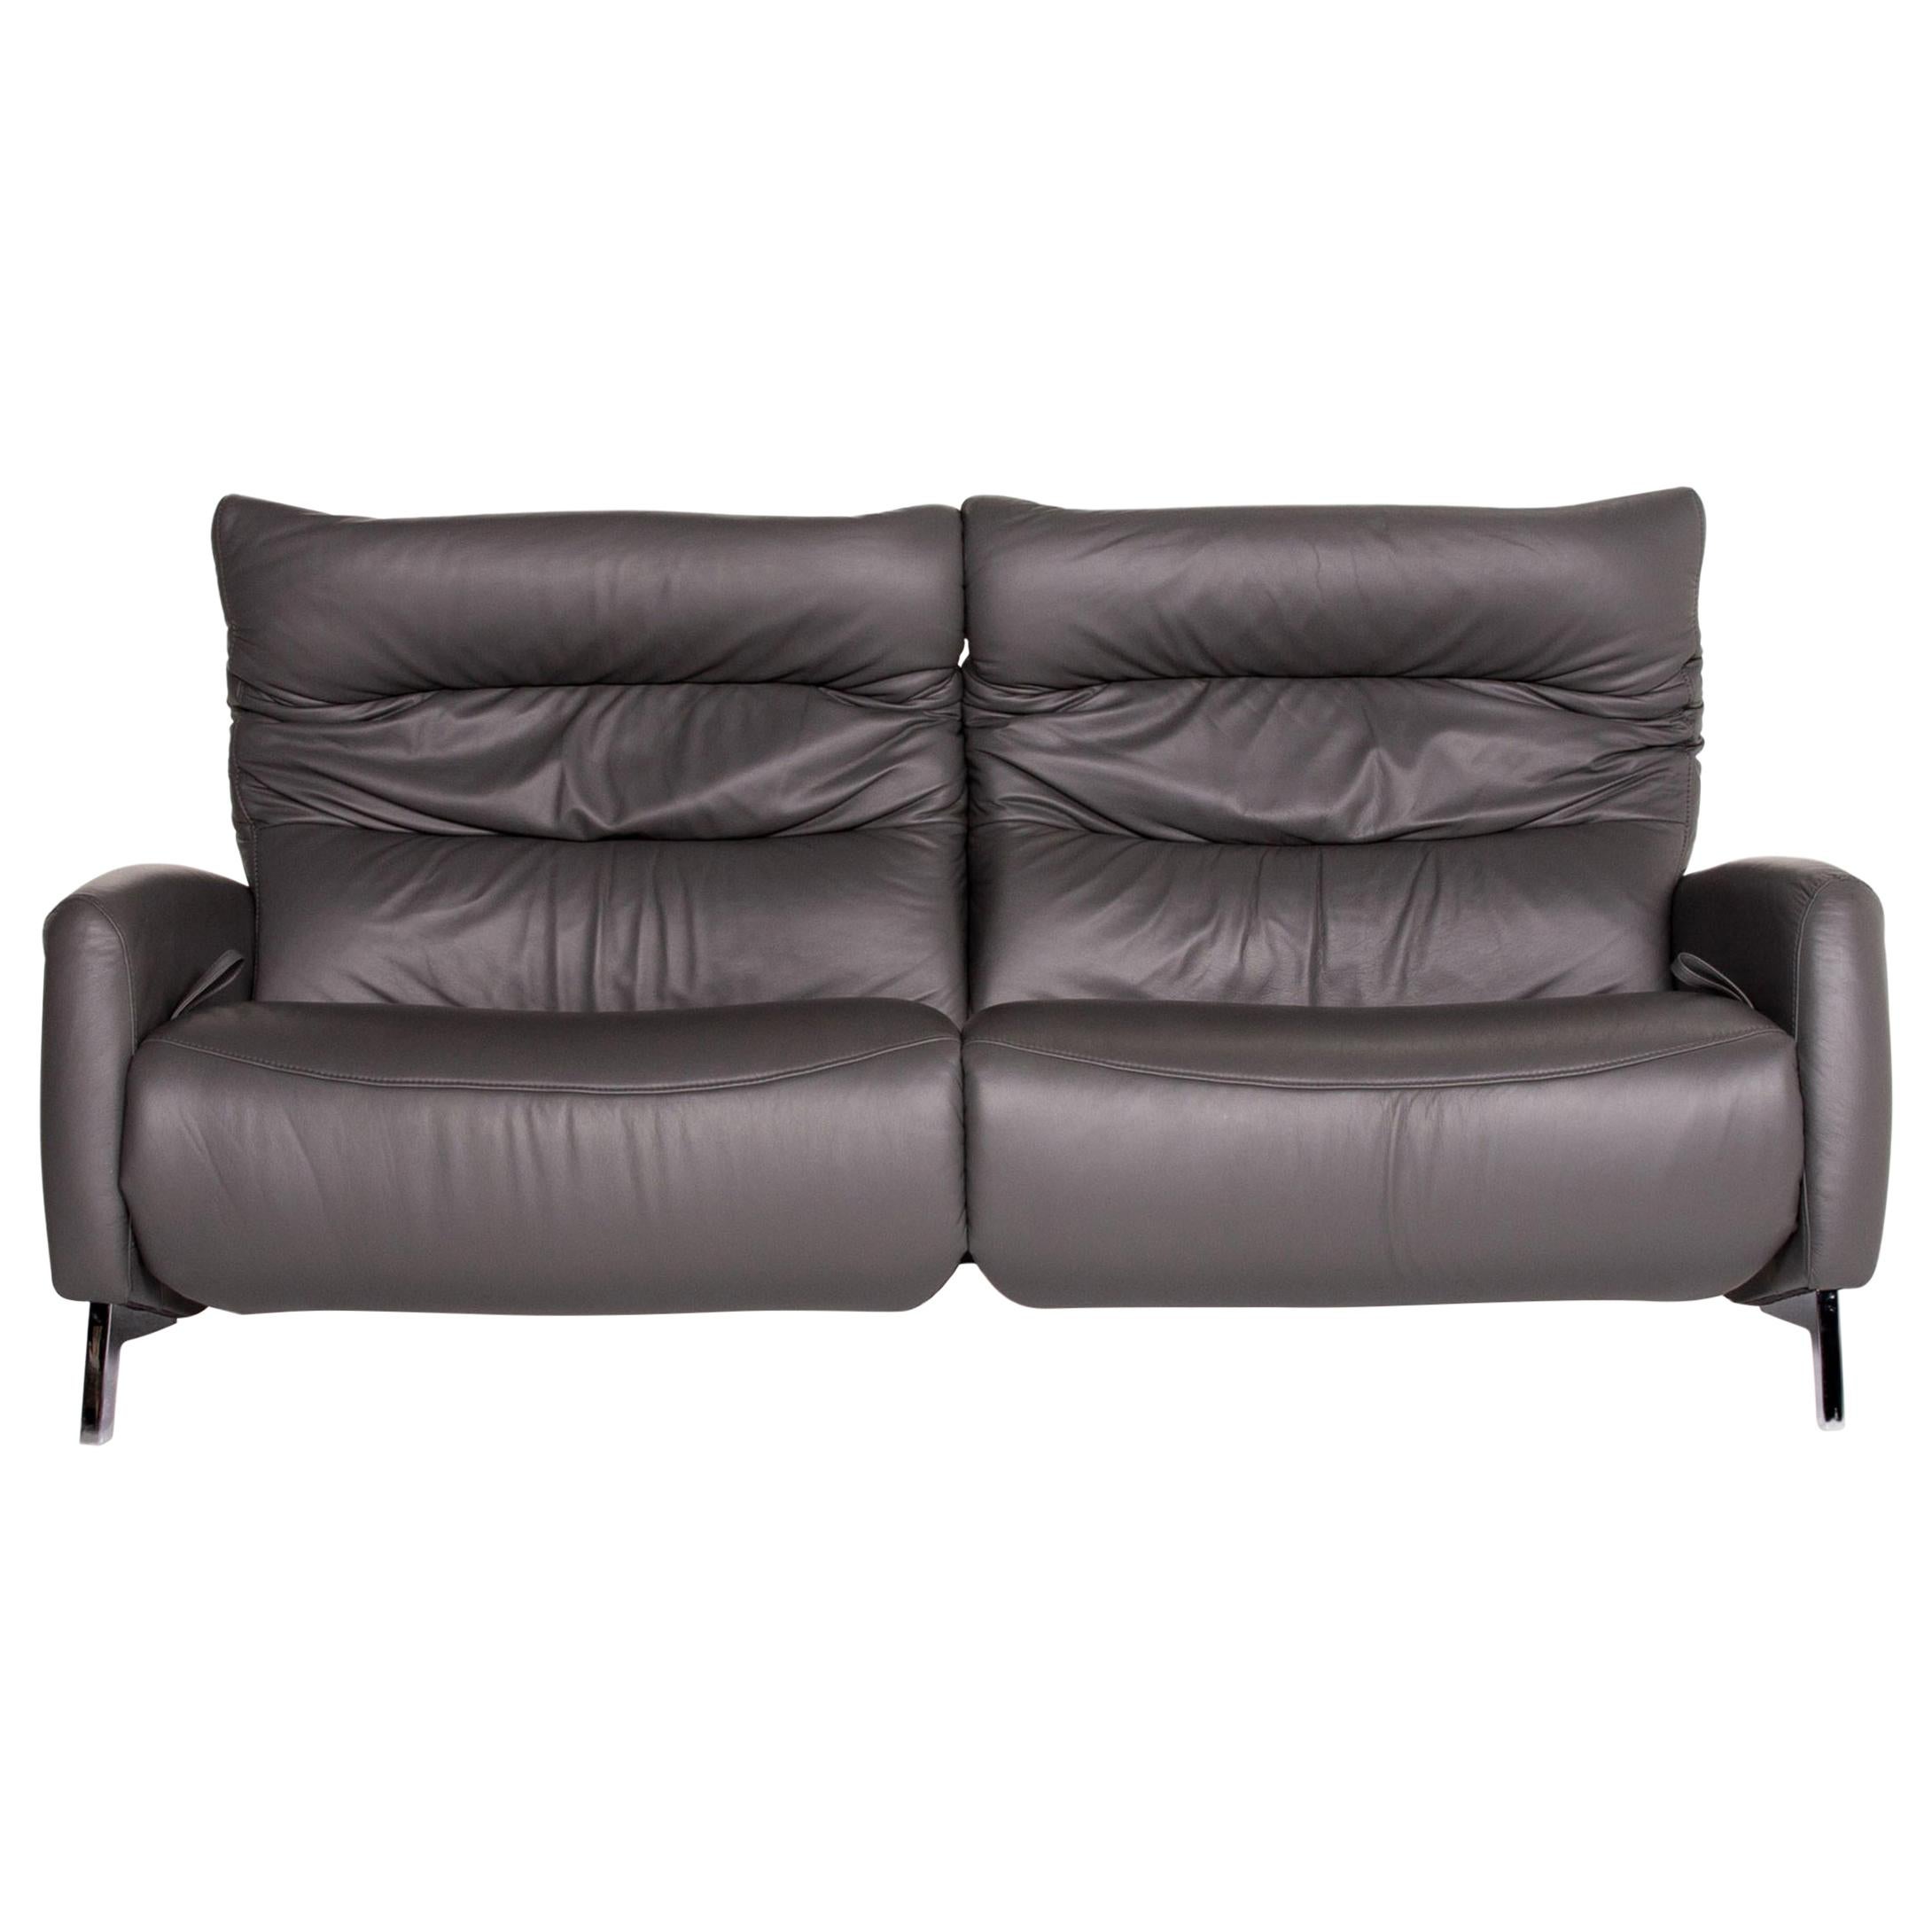 Mondo Recero Leather Sofa Gray Two-Seat Function Relax Function Couch